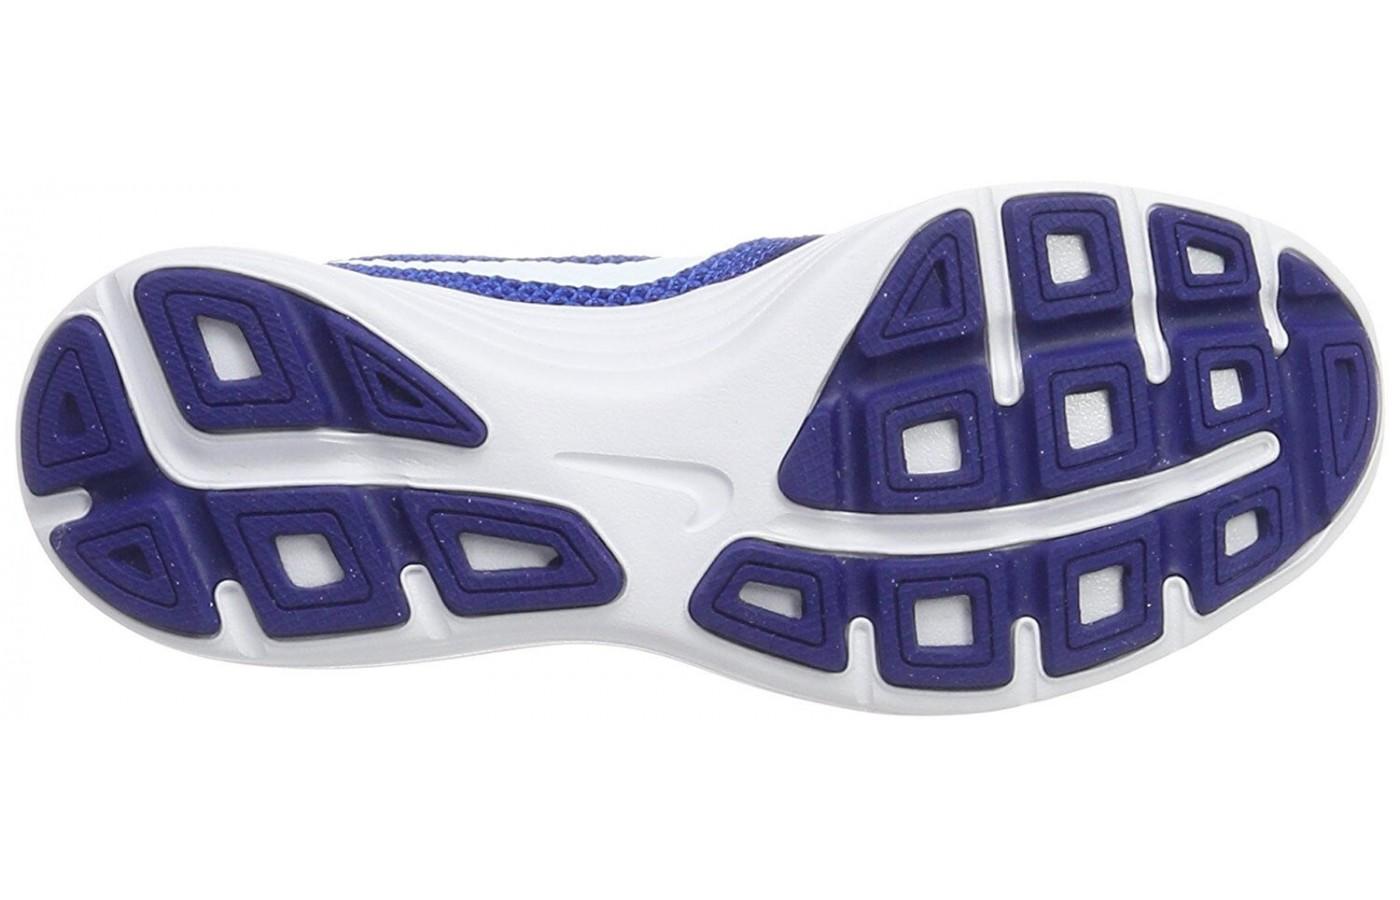 The Nike Revolution 3 has a rubber outsole with Flex Grooves